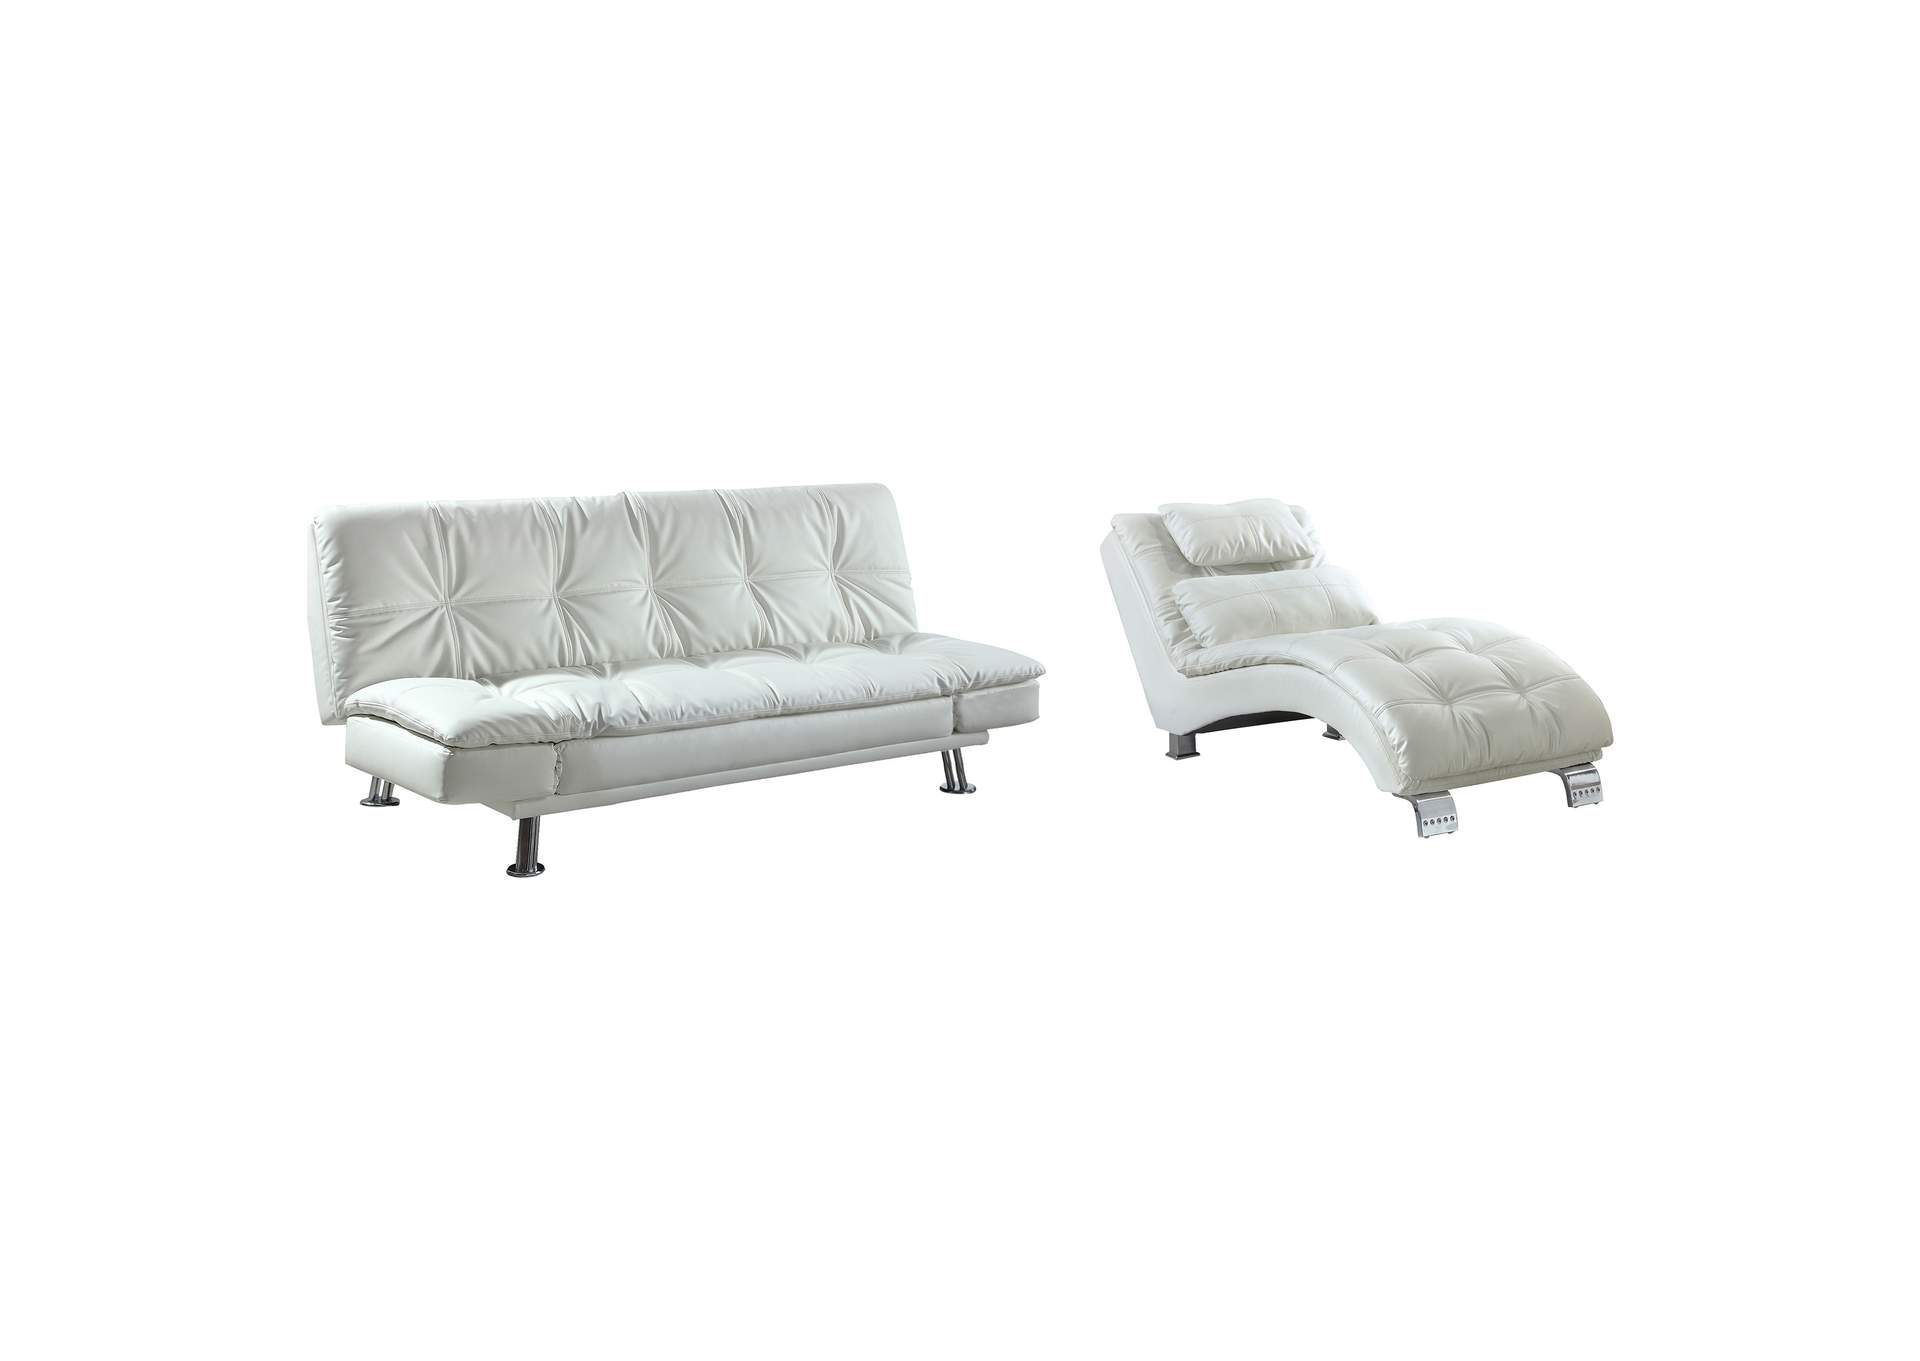 Dilleston Upholstered Chaise White,Coaster Furniture